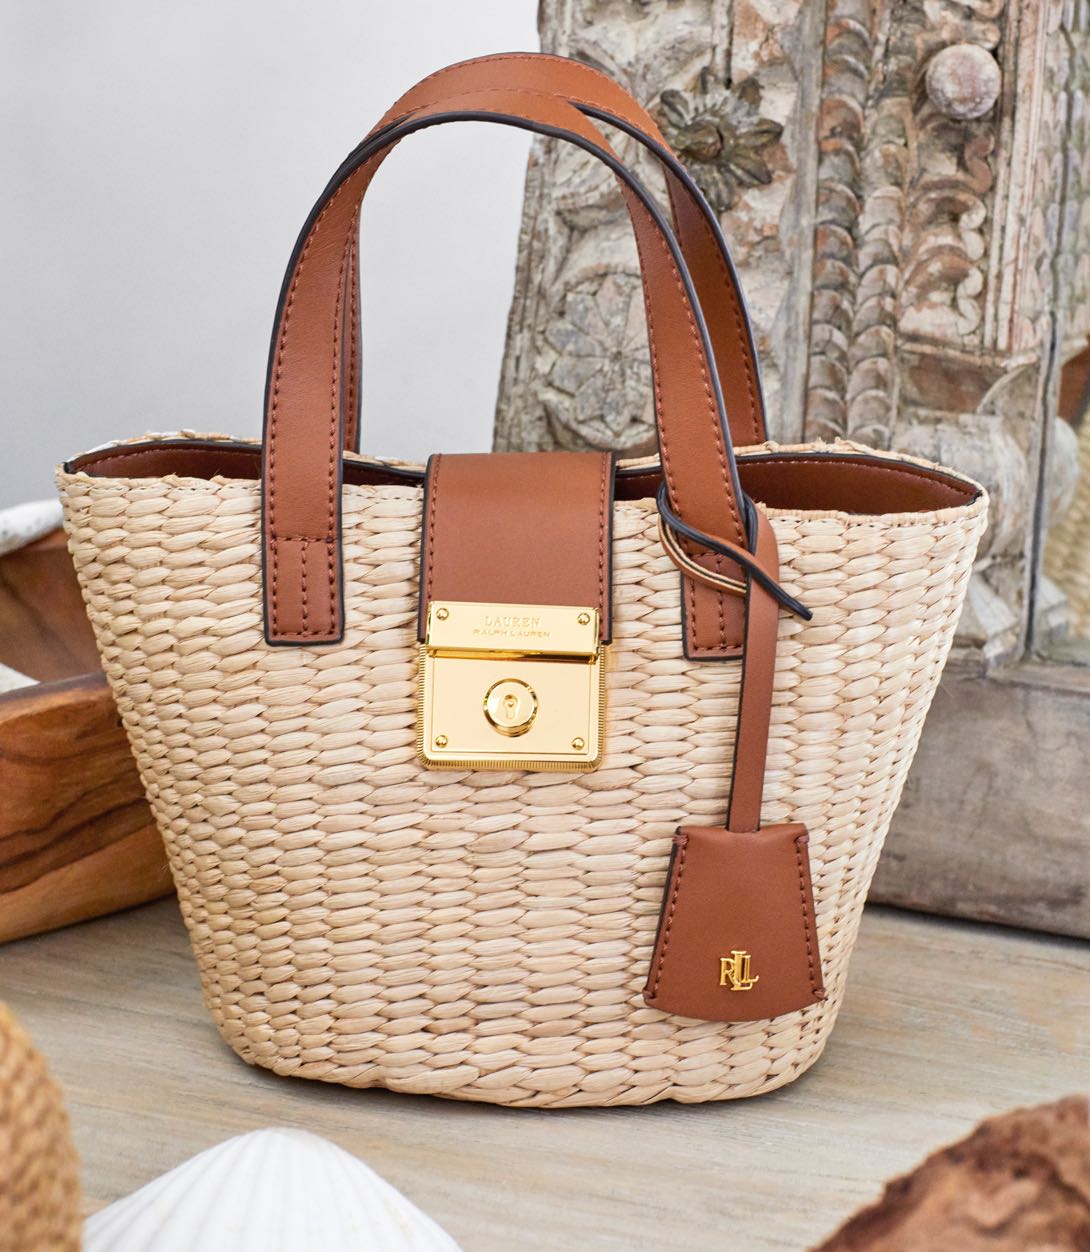 Woven straw bag with brown leather handles.